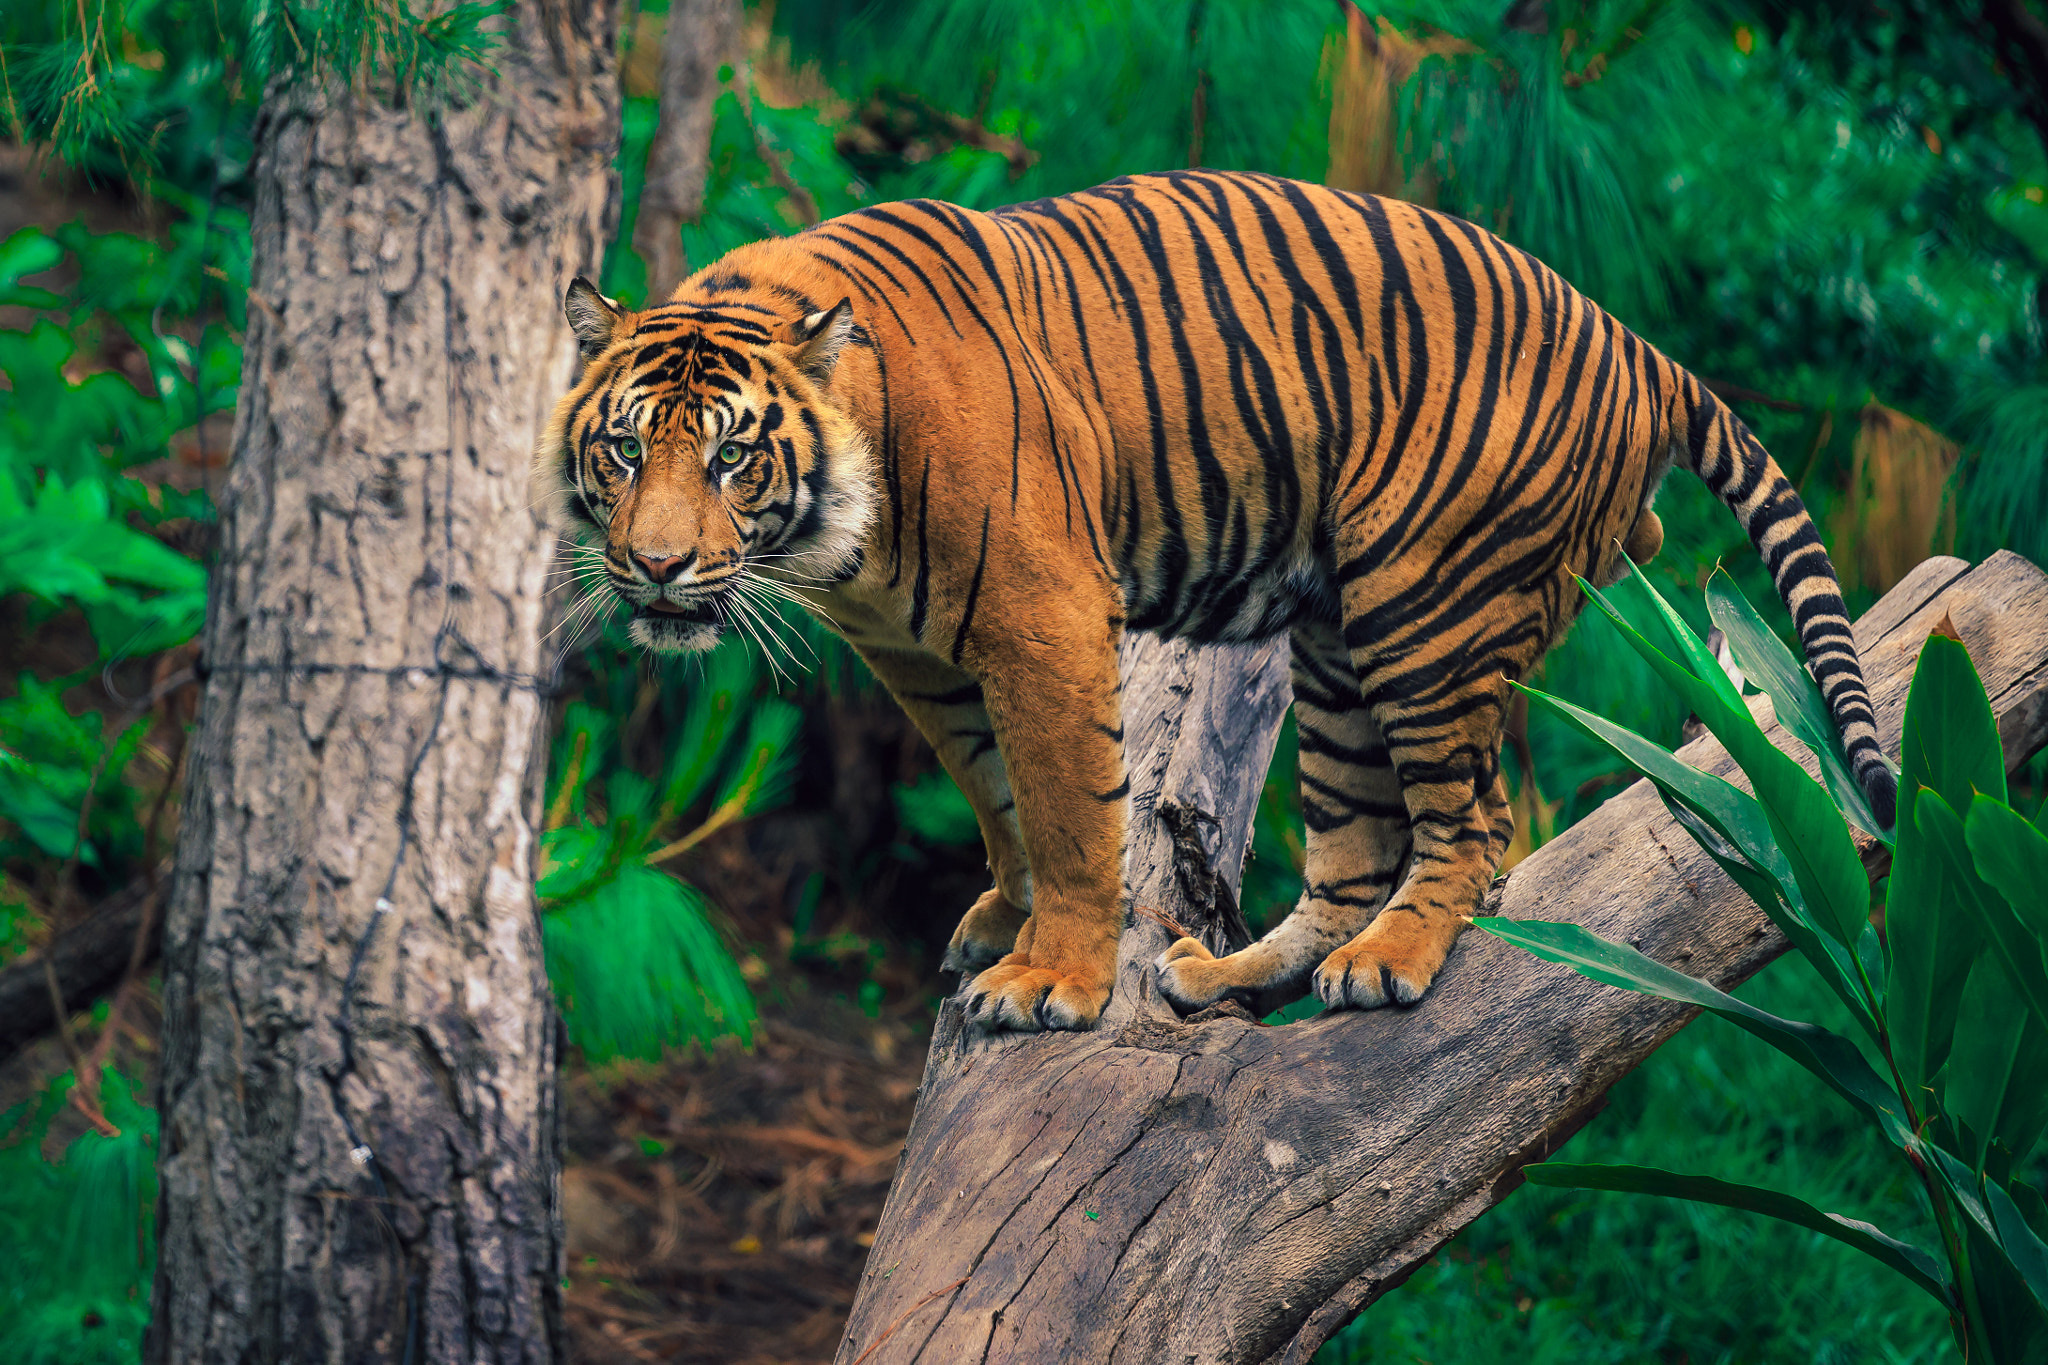 Tiger In The Trees 4k Ultra Hd Wallpaper For Desktop Laptop Tablet Mobile  Phones And Tv 3840x2400 : 